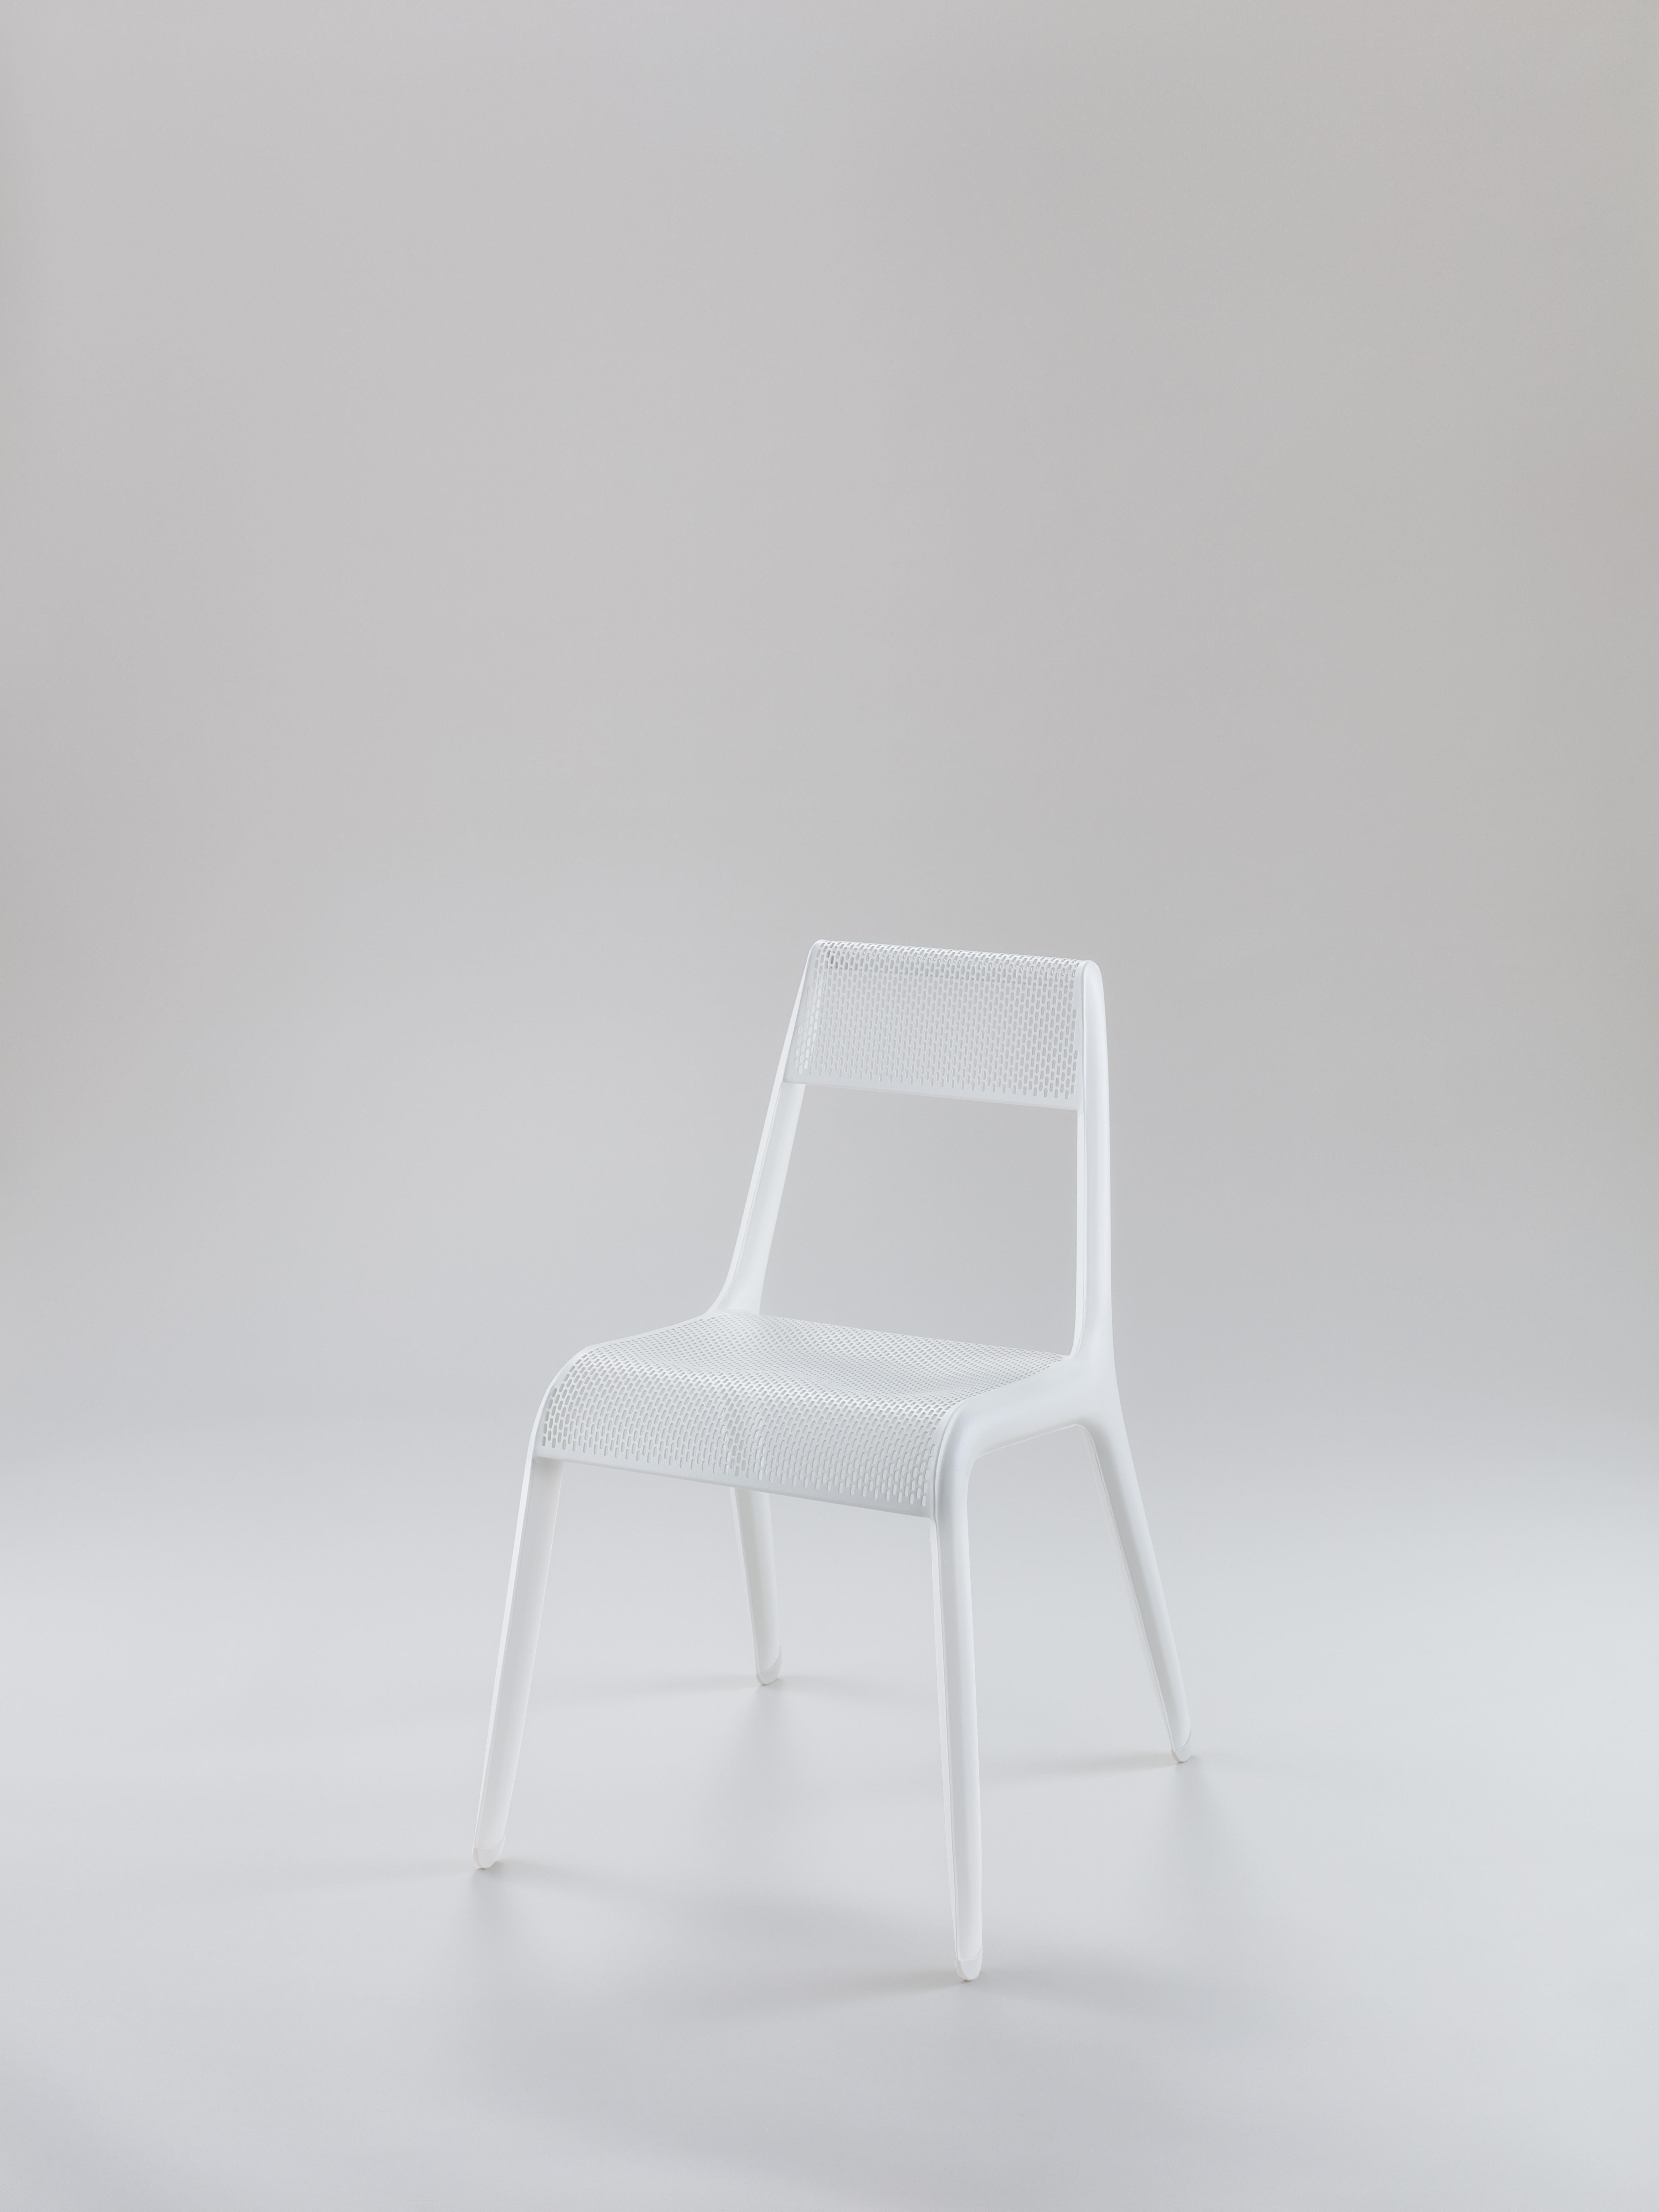 White Matt Ultraleggera Chair by Zieta
Dimensions: D 58 x W 49 x H 78 cm 
Material: Aluminum.
Finish: Powder-Coated.
Available in other colors. Also available in Leggera version. 


ULTRALEGGERA is a minimalist light metal chair. Thanks to its